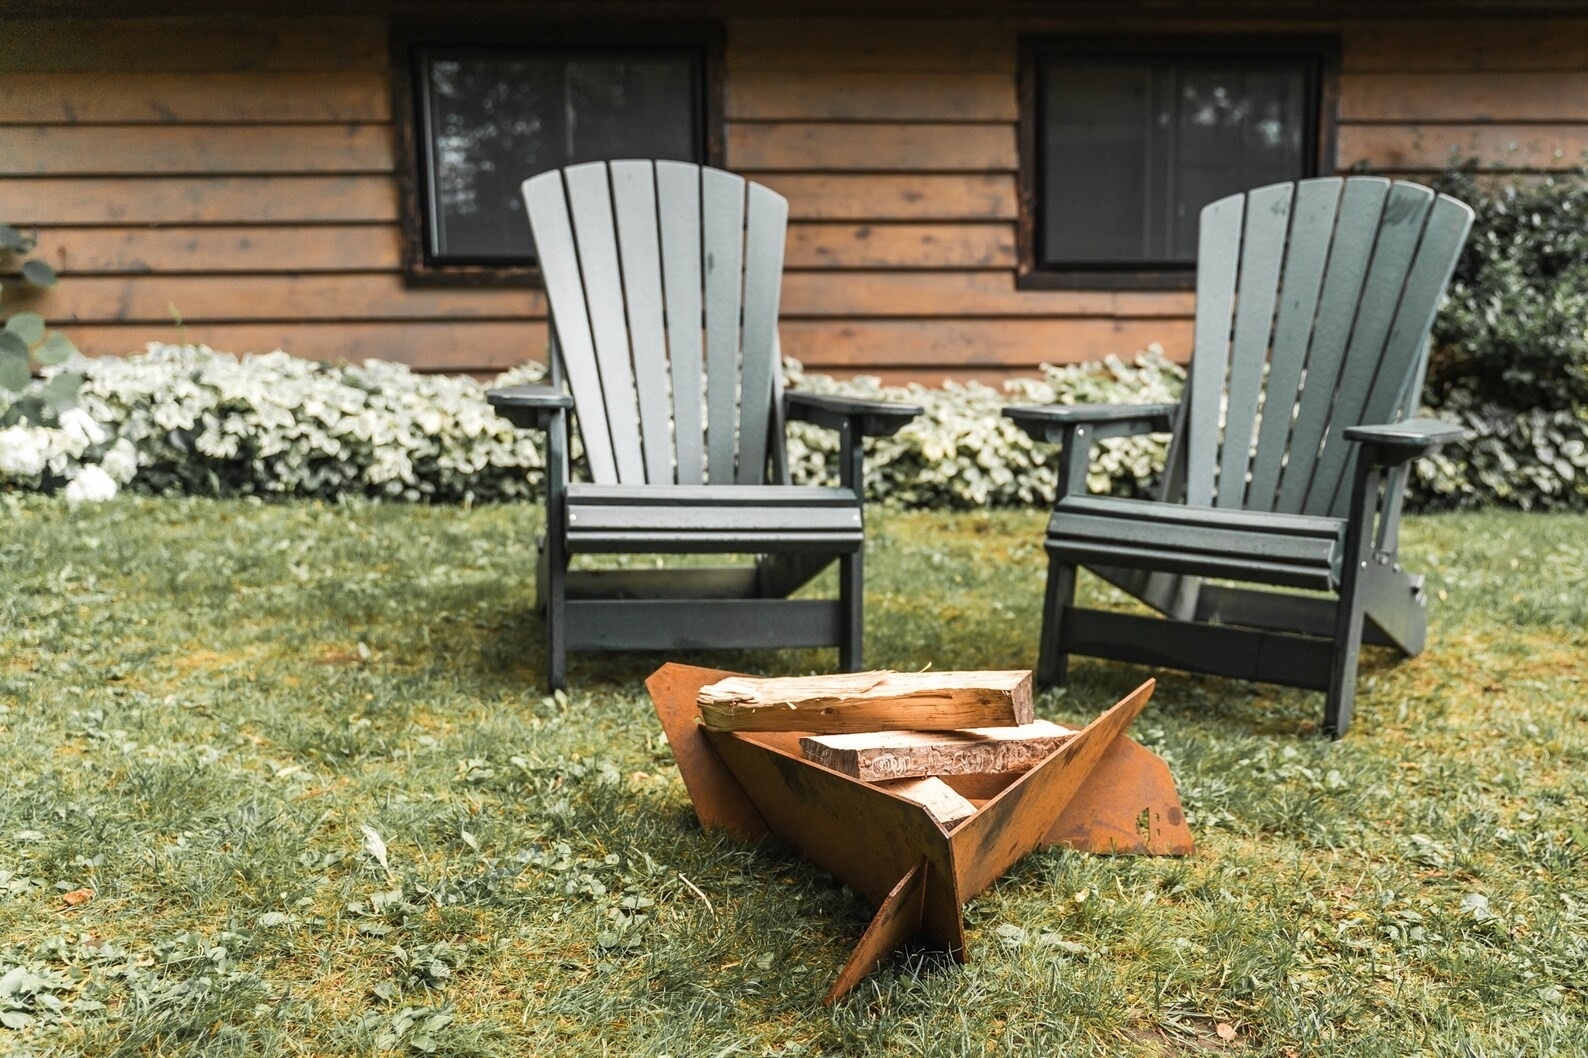 Two wooden Adirondack chairs facing a small fire pit in a backyard setting